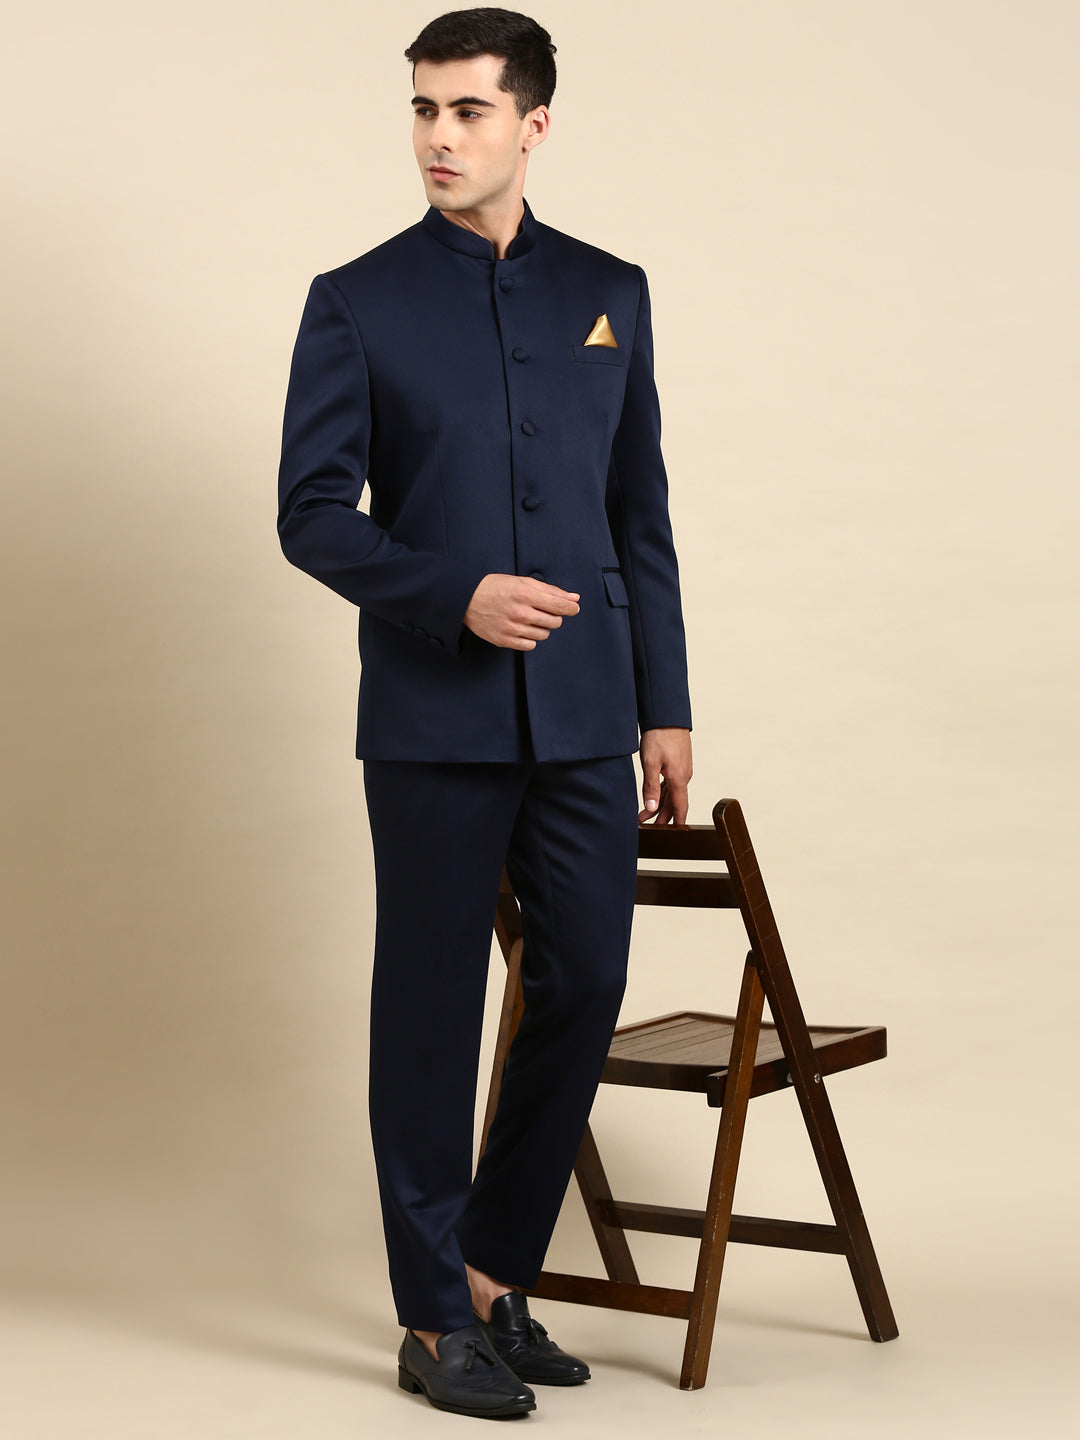 Navy Blue Bandhgala Suit – The Ethnic Co